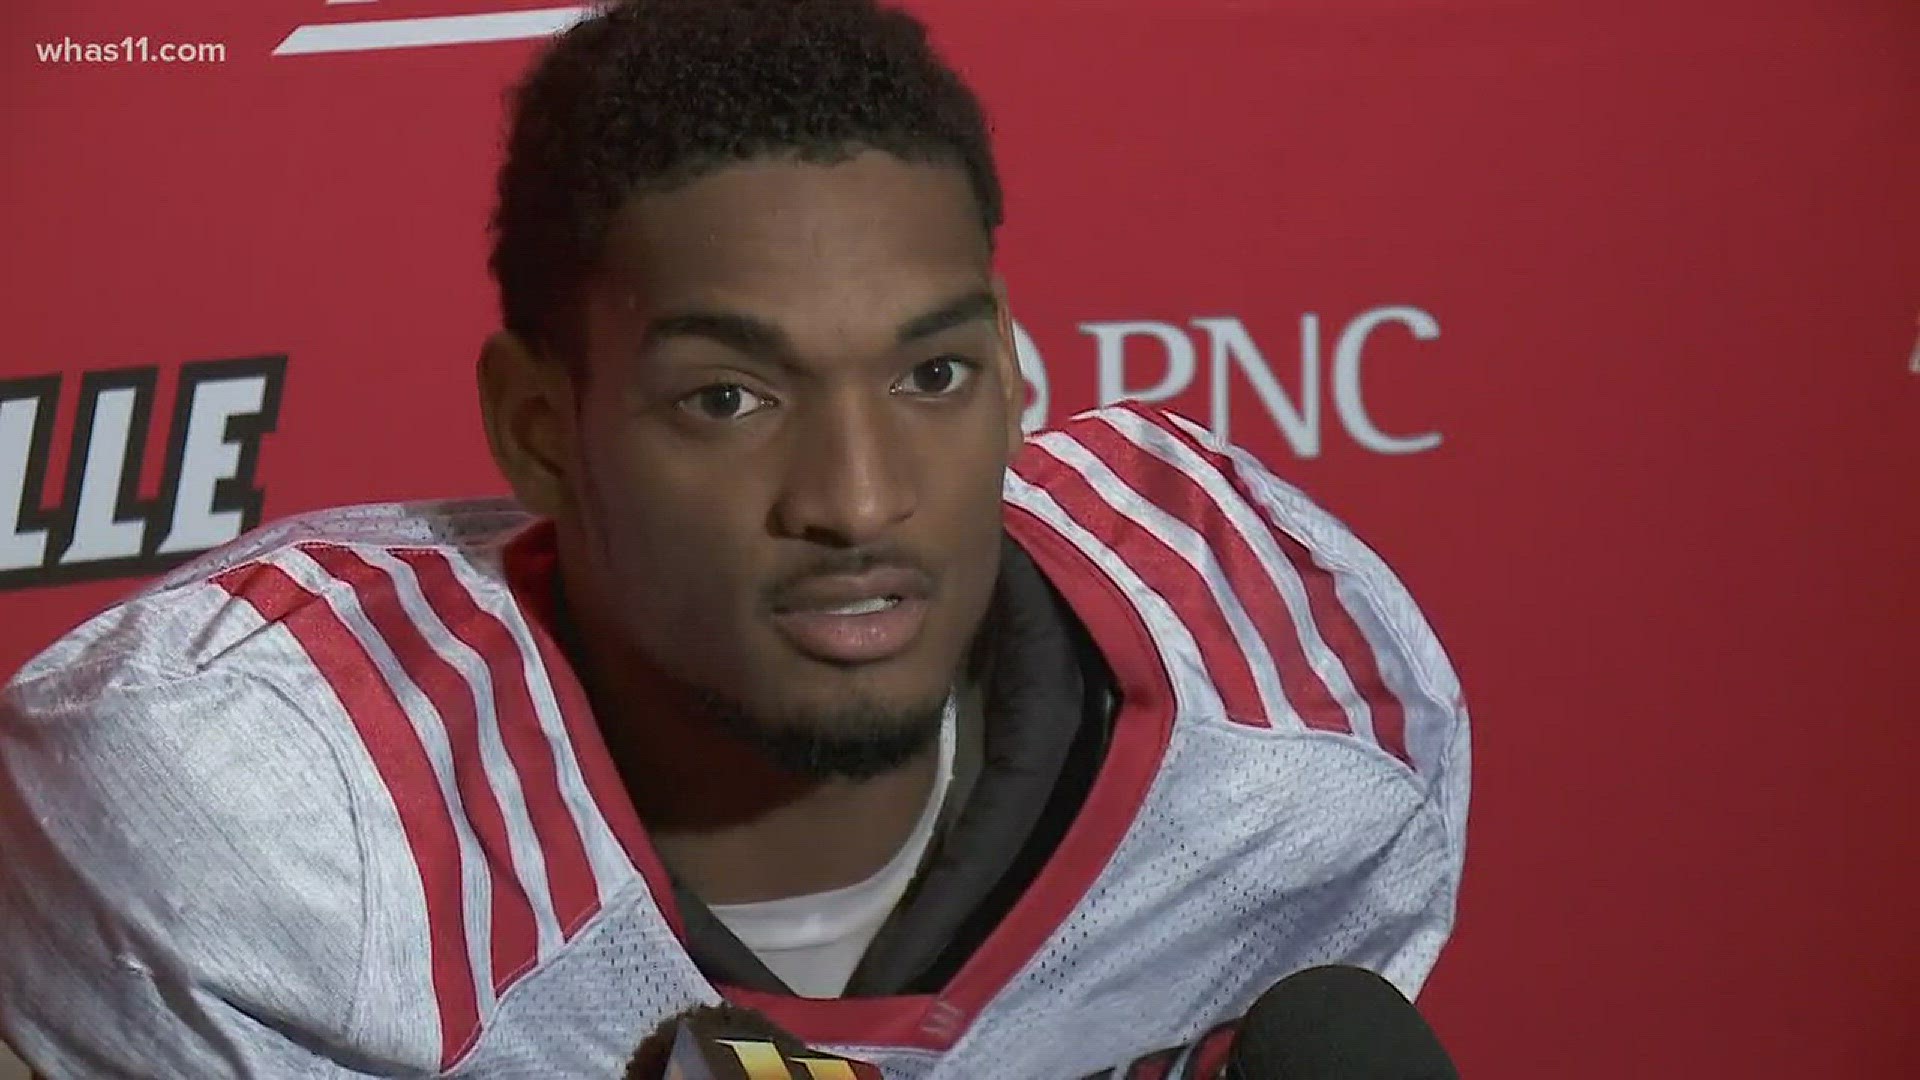 UofL's Bonnafon making the most of his opportunities